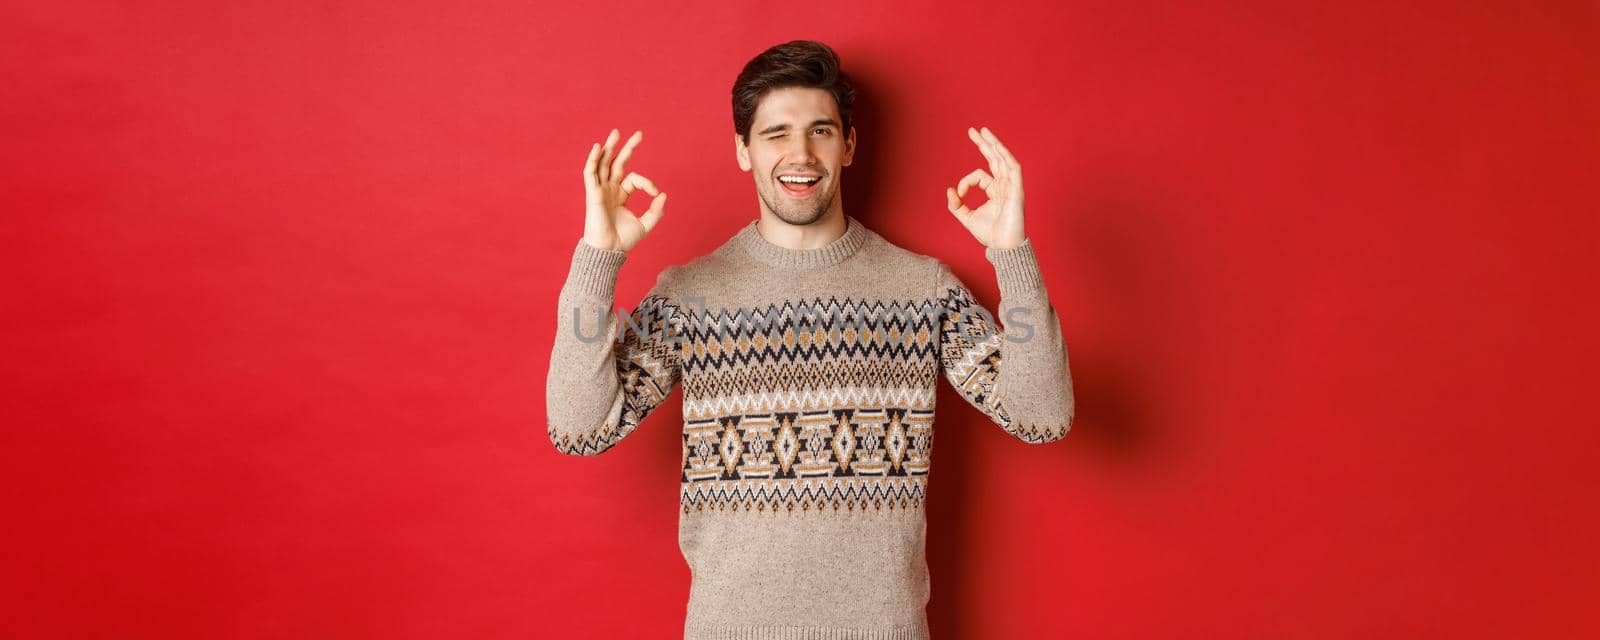 Concept of christmas celebration, winter holidays and lifestyle. Confident and cheeky handsome man, guarantee everything good, showing okay signs and winking at camera, red background.